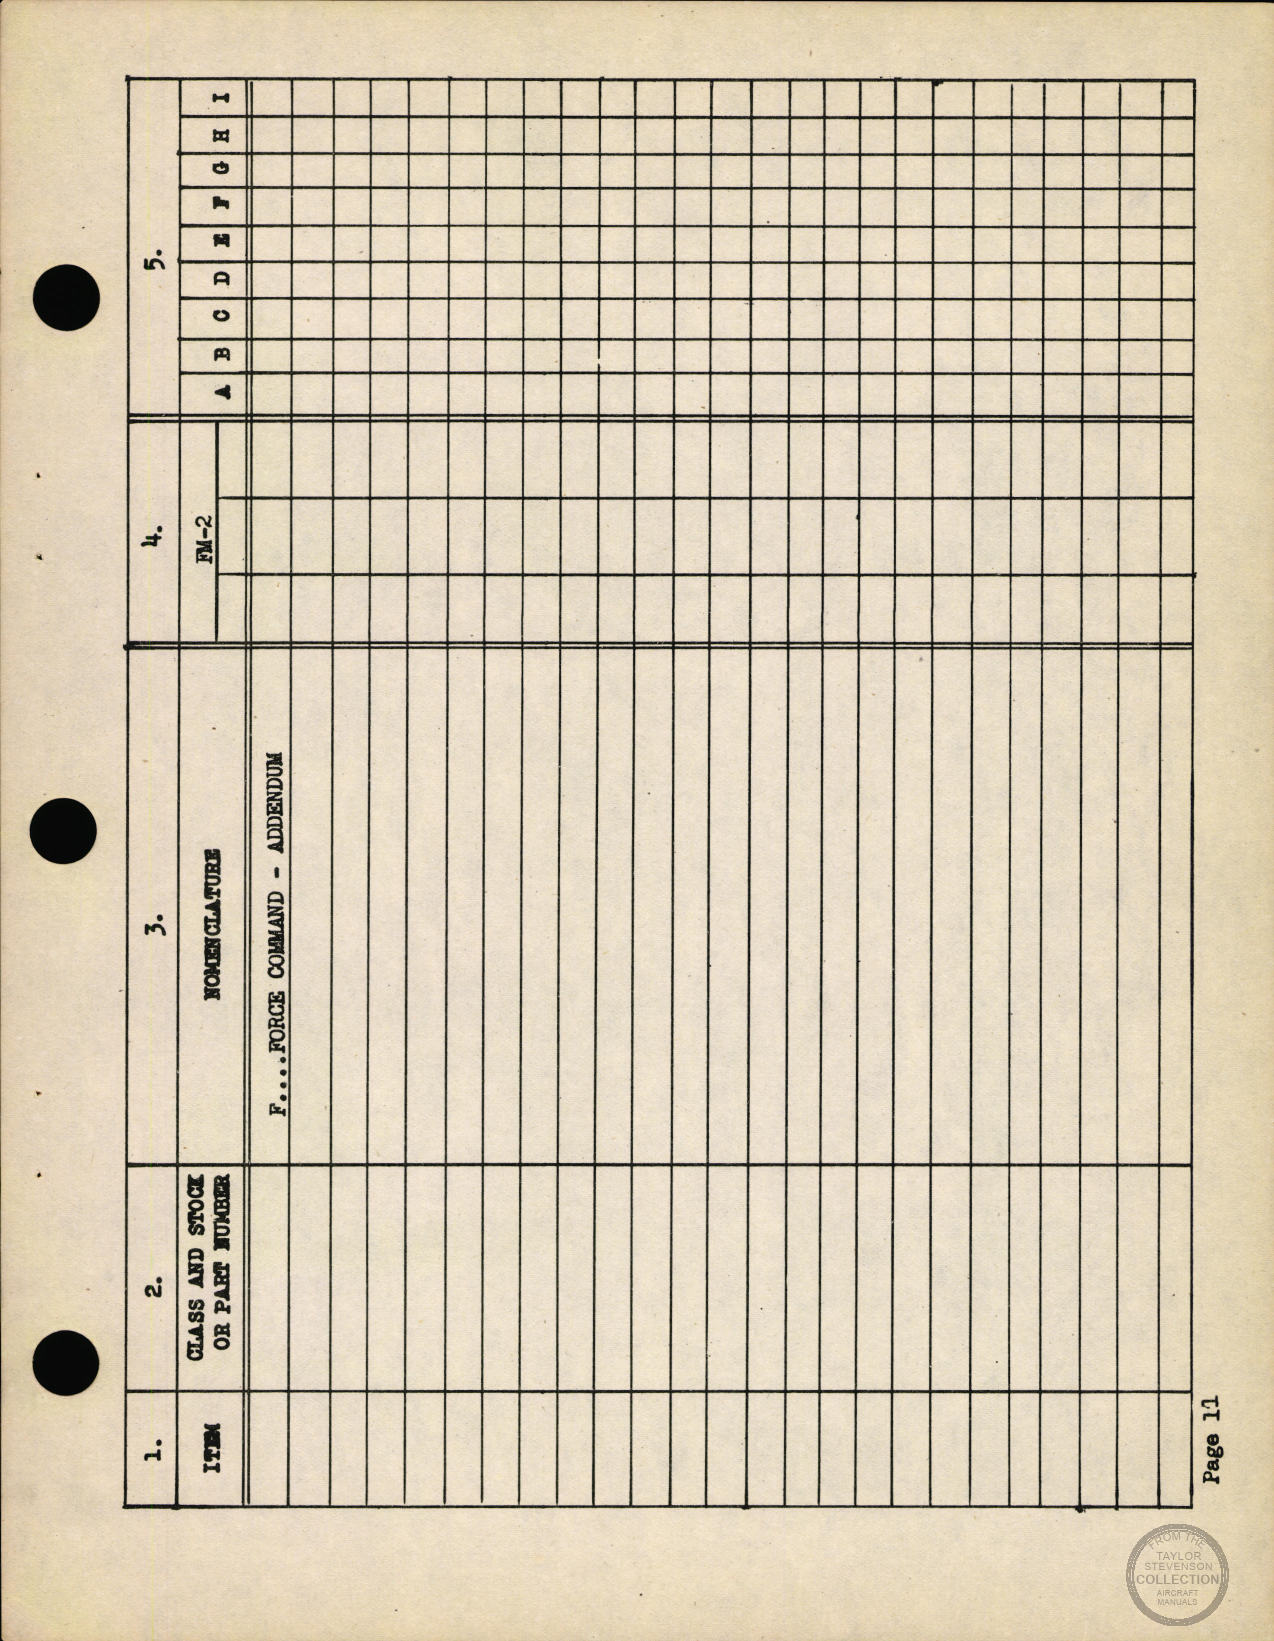 Sample page 16 from AirCorps Library document: Bureau of Aeronautics Standard Inventory List, FM-2 Wildcat